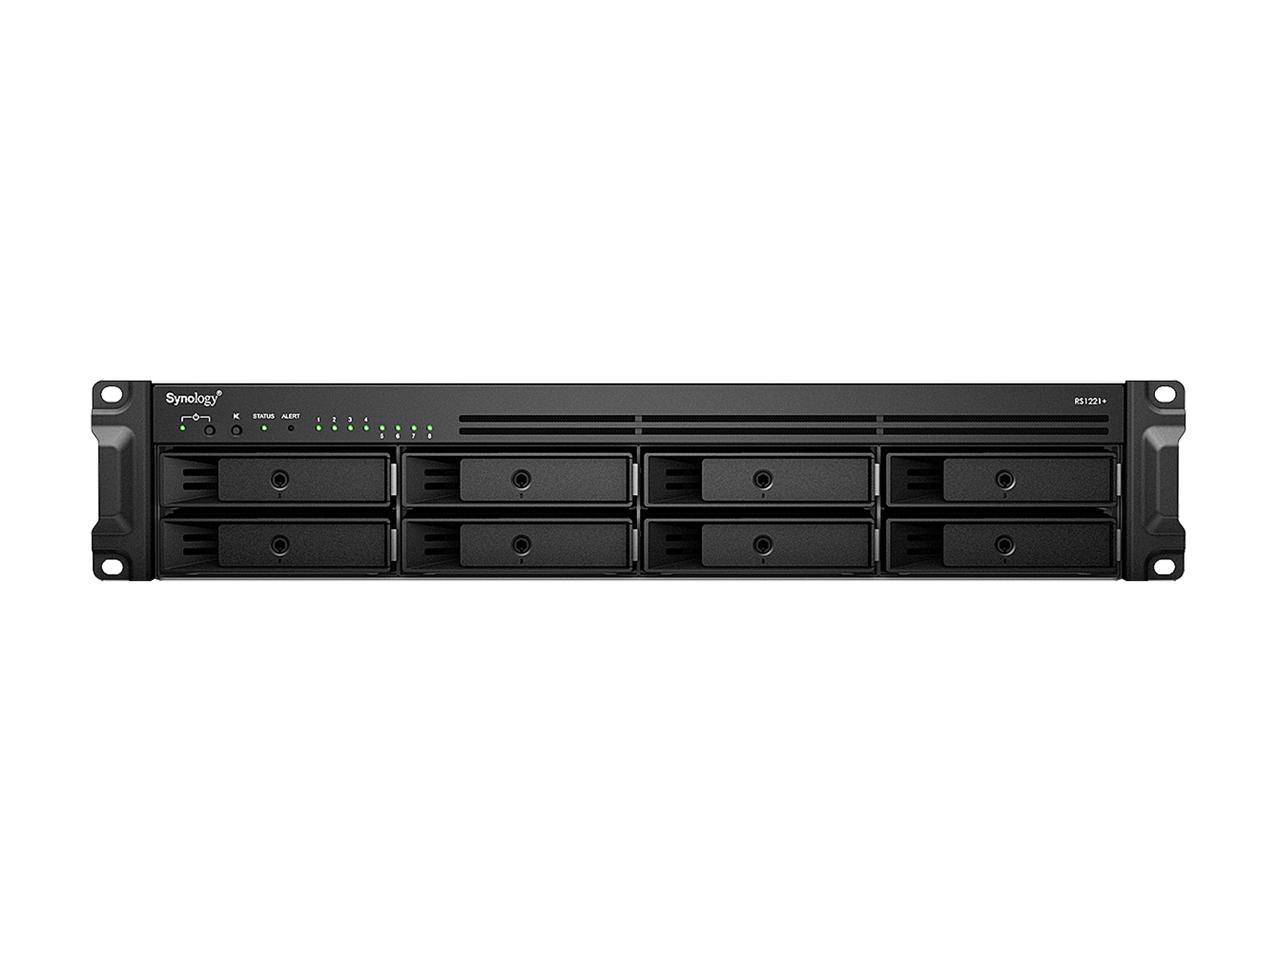 Synology RS1221+ RackStation with 8GB RAM 1.6TB (2x800GB) Cache, 1-Port 10GbE Adapter and 96TB (8 x 12TB) of Synology Plus NAS Drives Fully Assembled and Tested